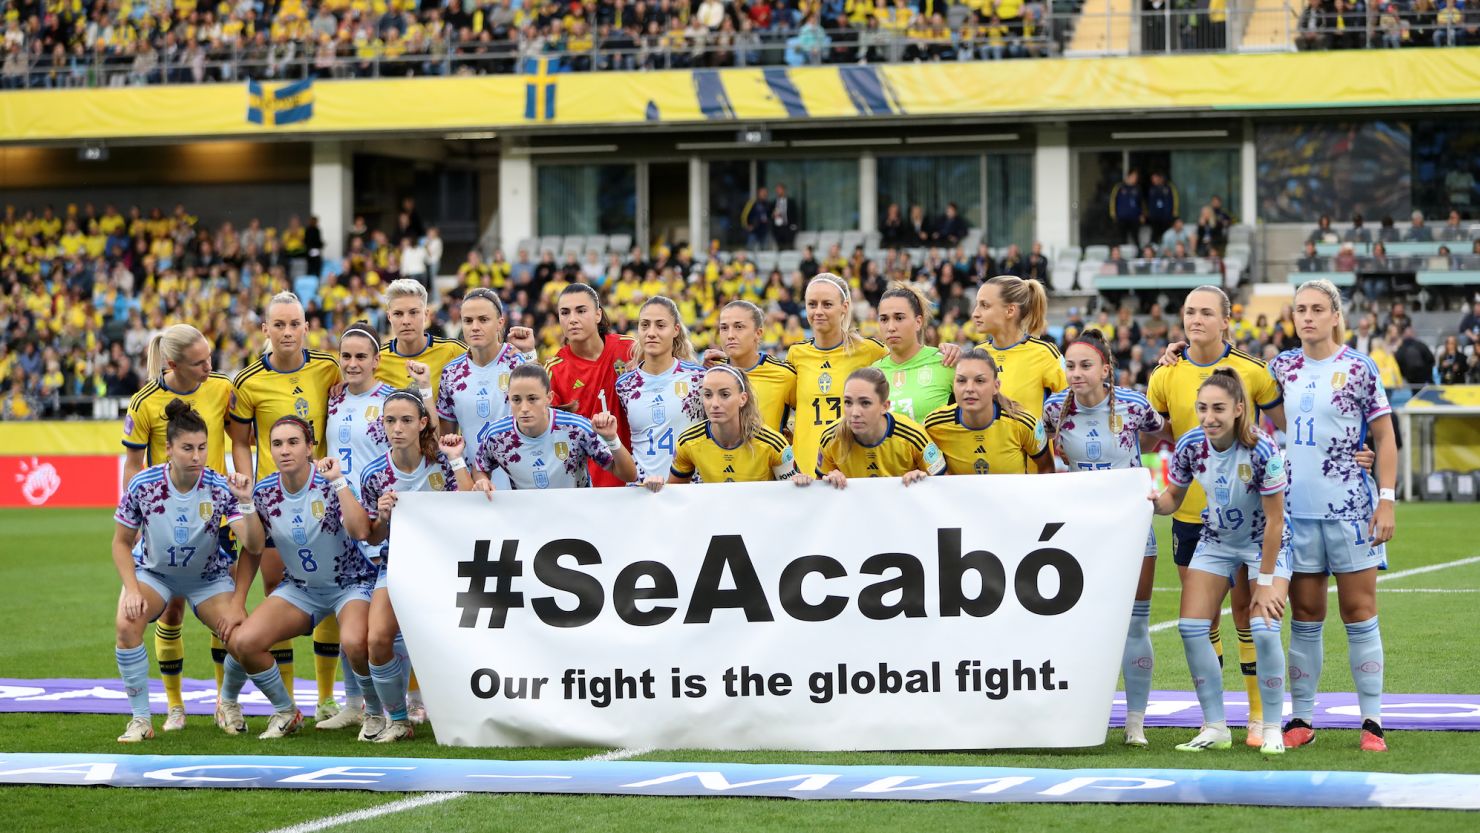 GOTHENBURG, SWEDEN - SEPTEMBER 22: Players of Sweden and Spain hold a banner which reads 'SeAcabo, Our fight is the global fight.' in support of the Spain national women's team prior to the UEFA Womens Nations League match between Sweden and Spain at Gamla Ullevi on September 22, 2023 in Gothenburg, Sweden. (Photo by Linnea Rheborg/Getty Images)